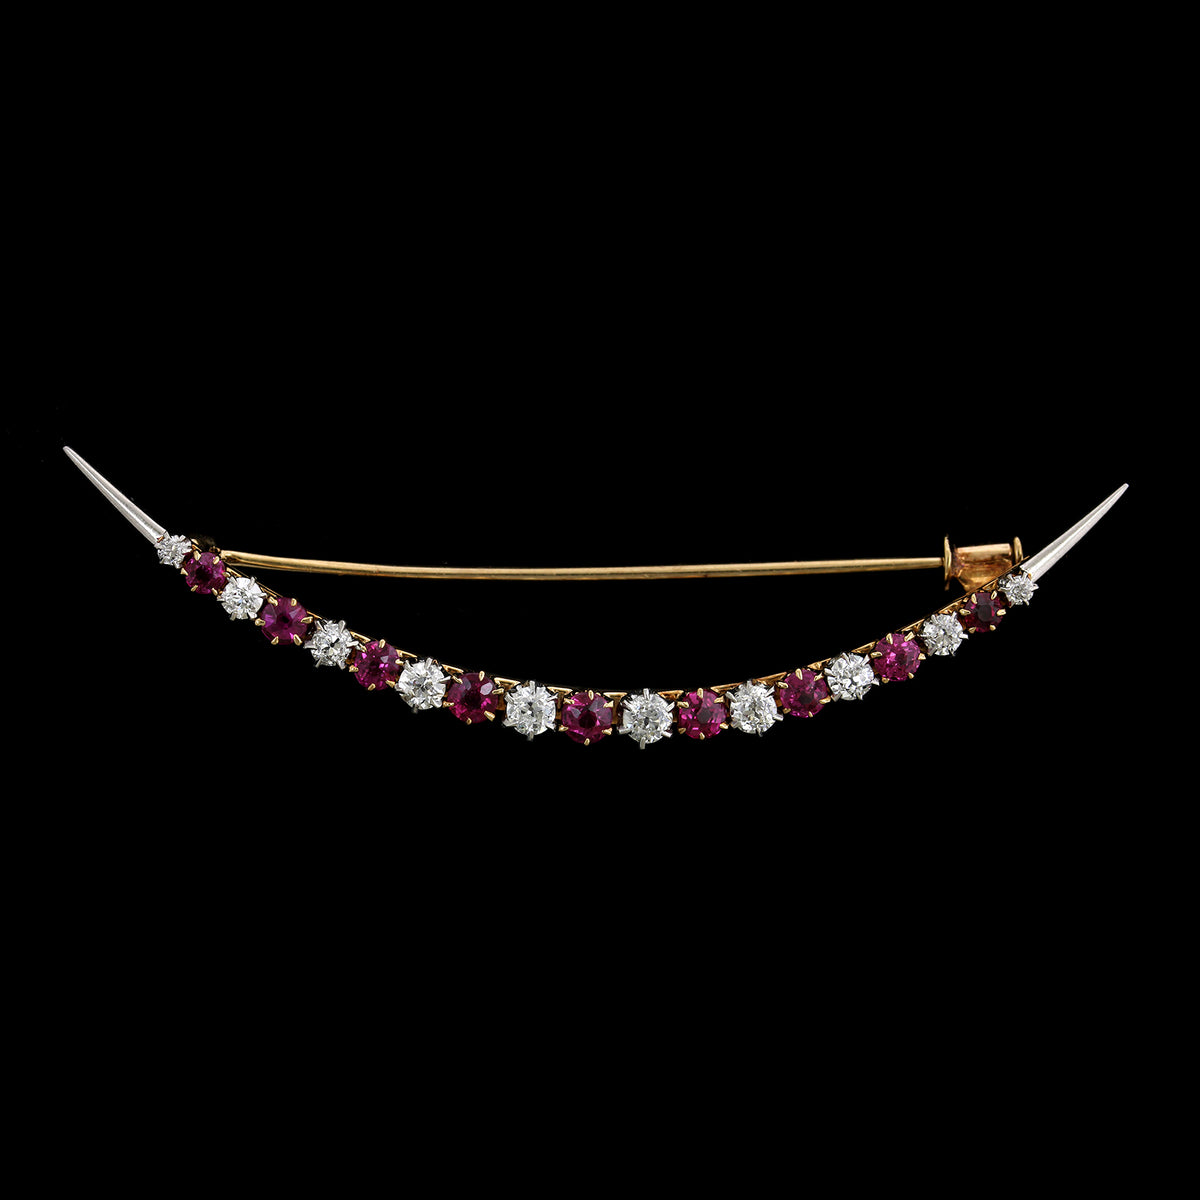 Antique Estate Ruby and Diamond Crescent Moon Pin